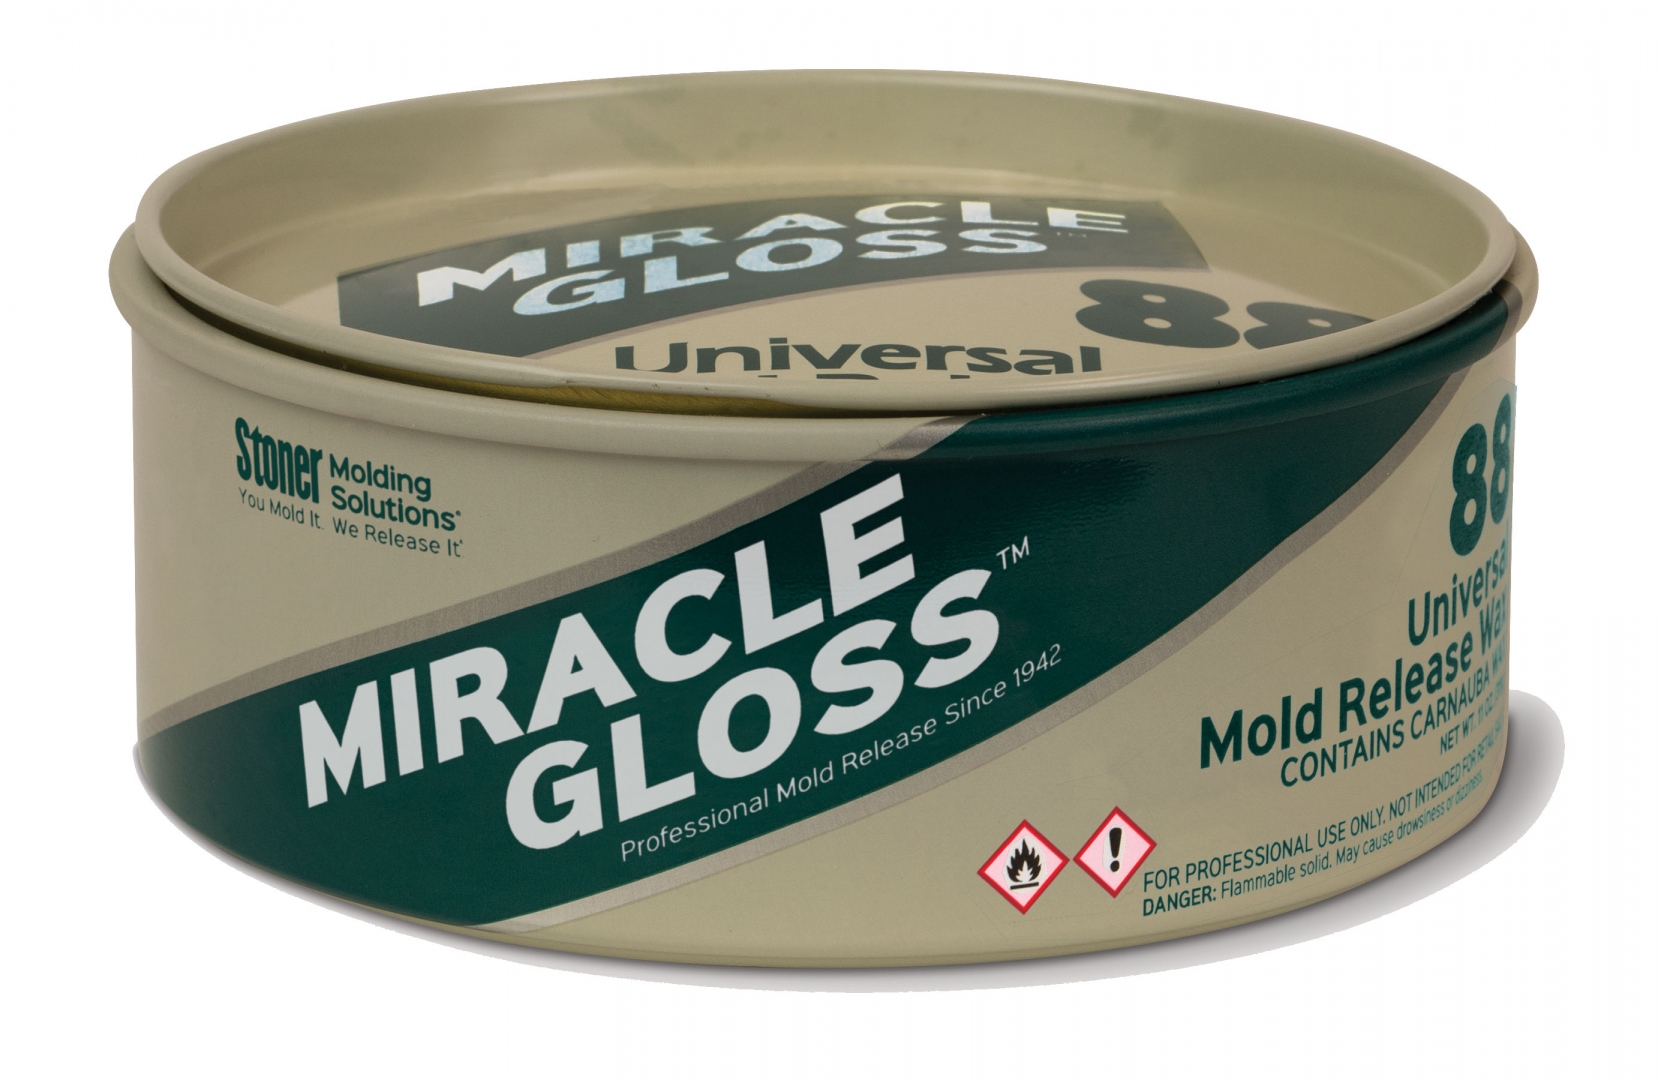 Universal™ Mold Release Product Information